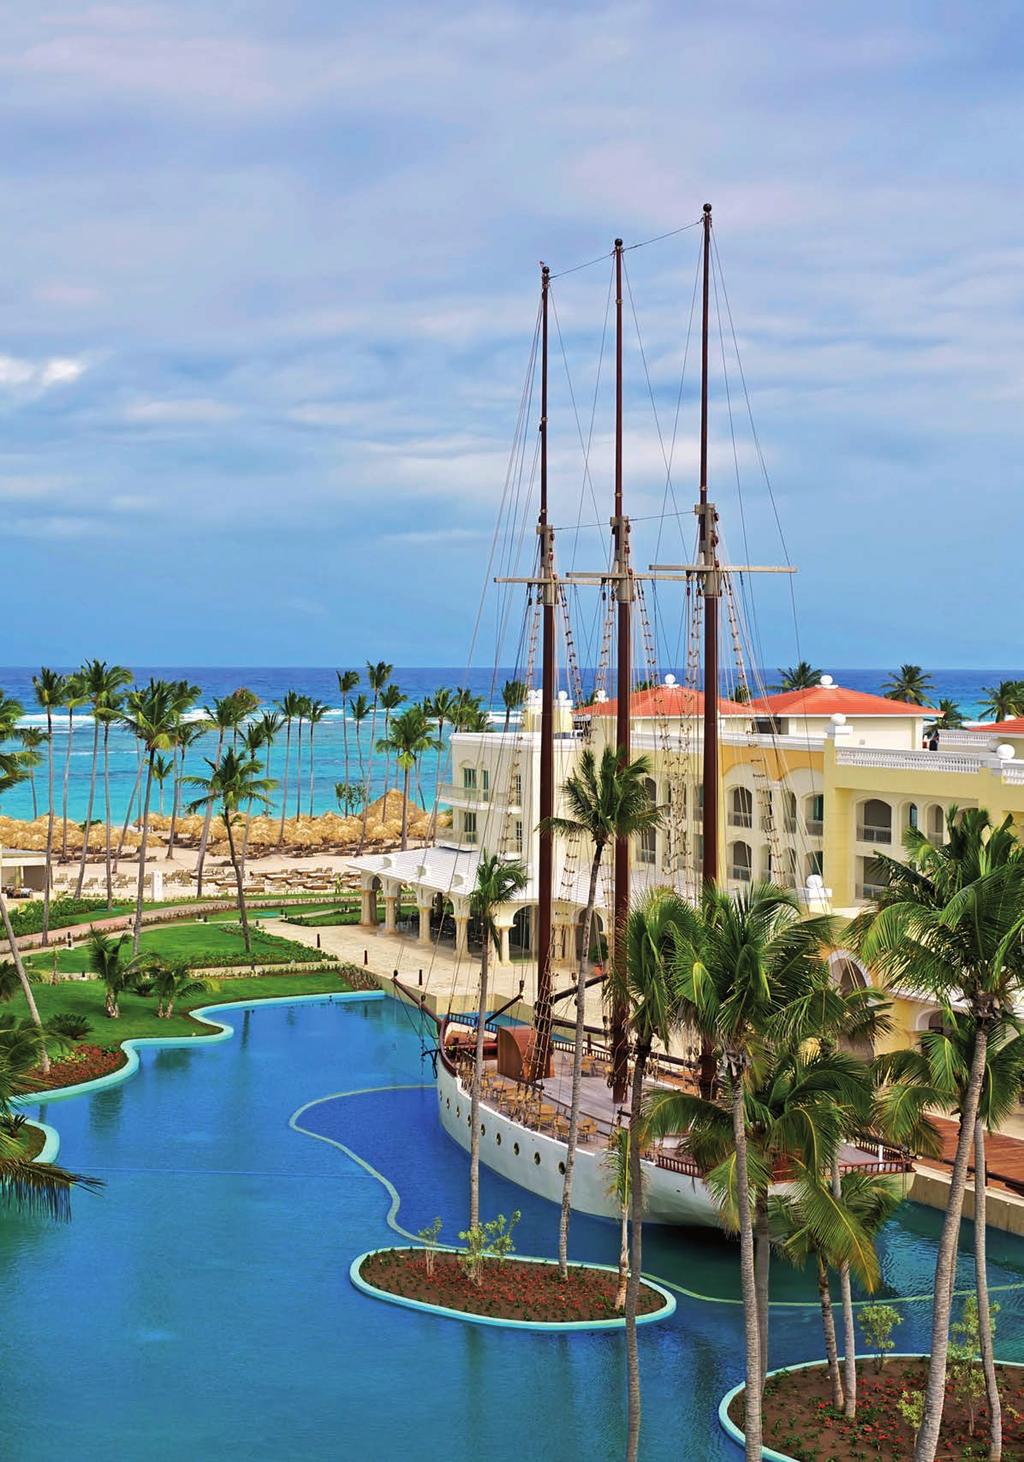 Magical places, unique resorts A true gem of the Dominican